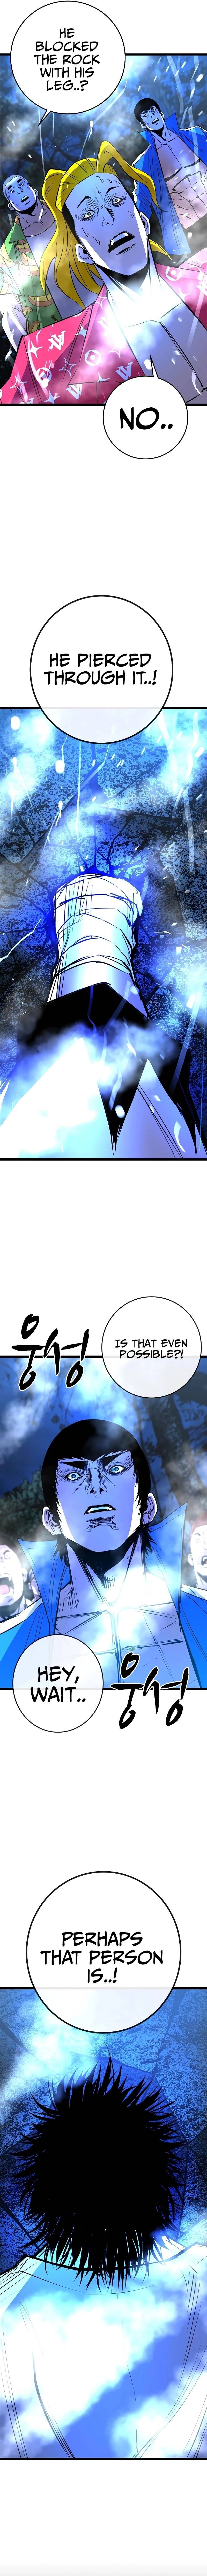 Hanlim Gym Chapter 123 page 22